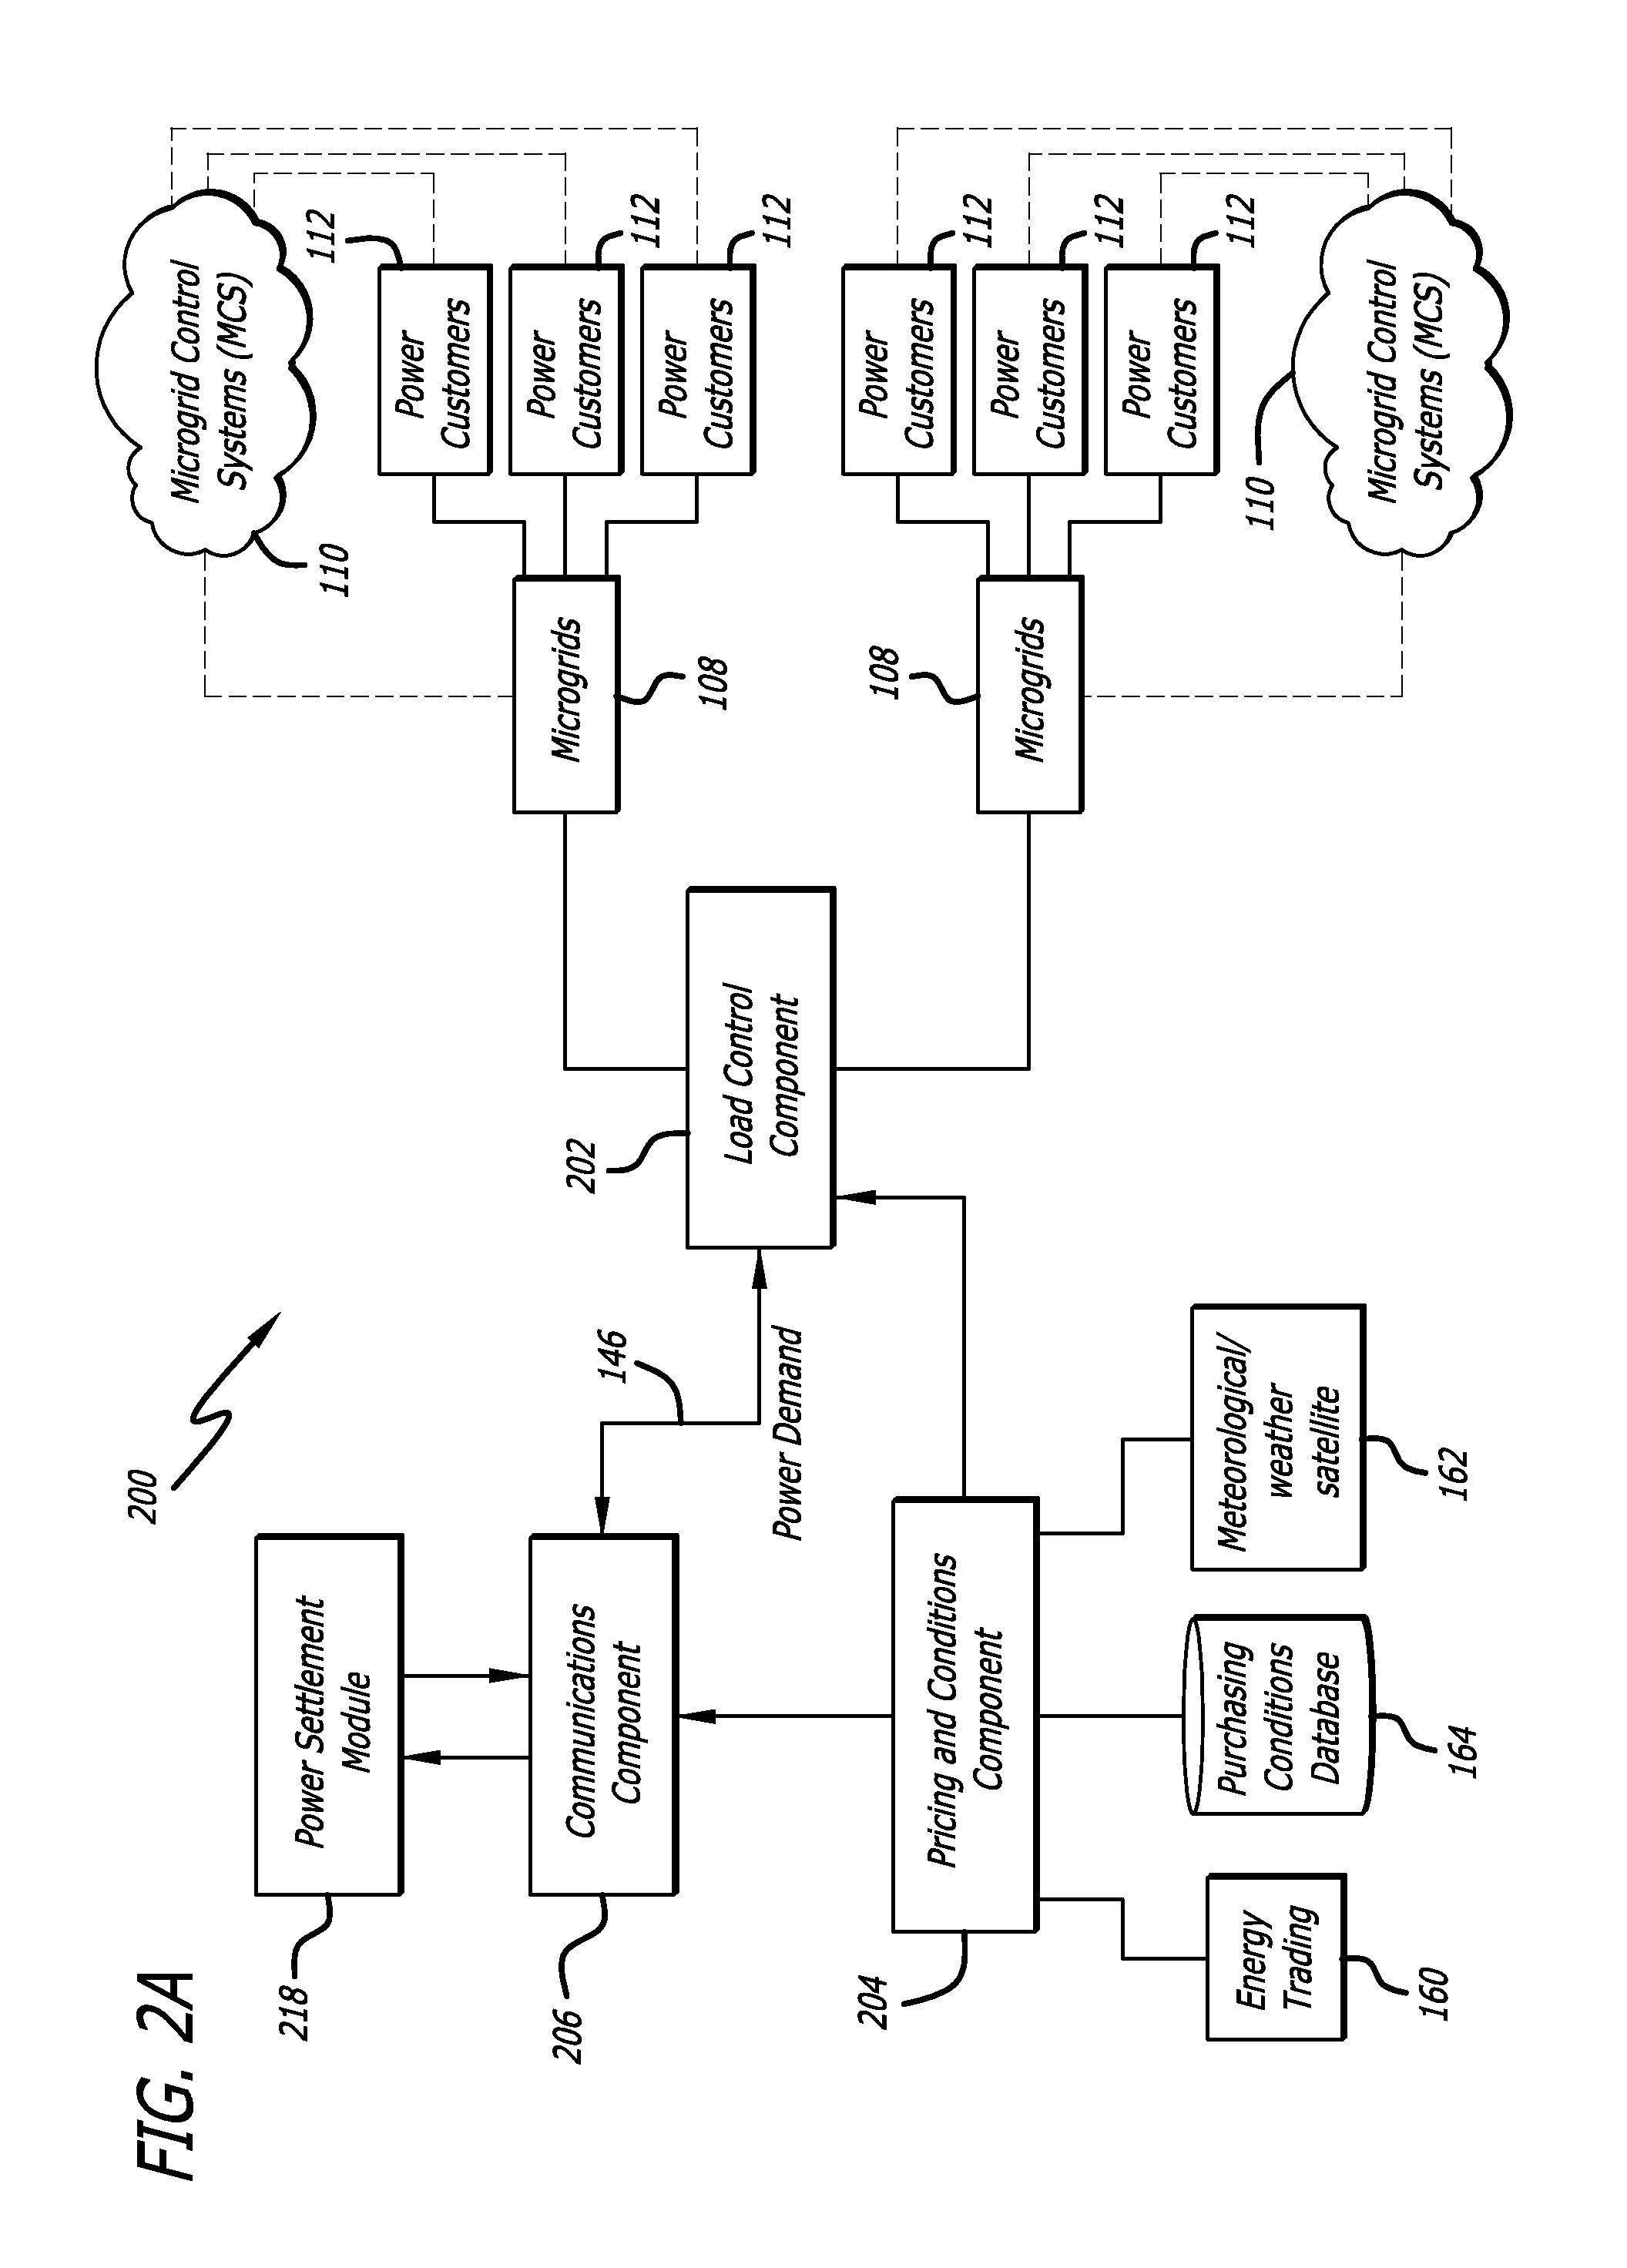 Transmission system for delivery of dynamic demand response in a renewable energy-based electricity grid infrastructure